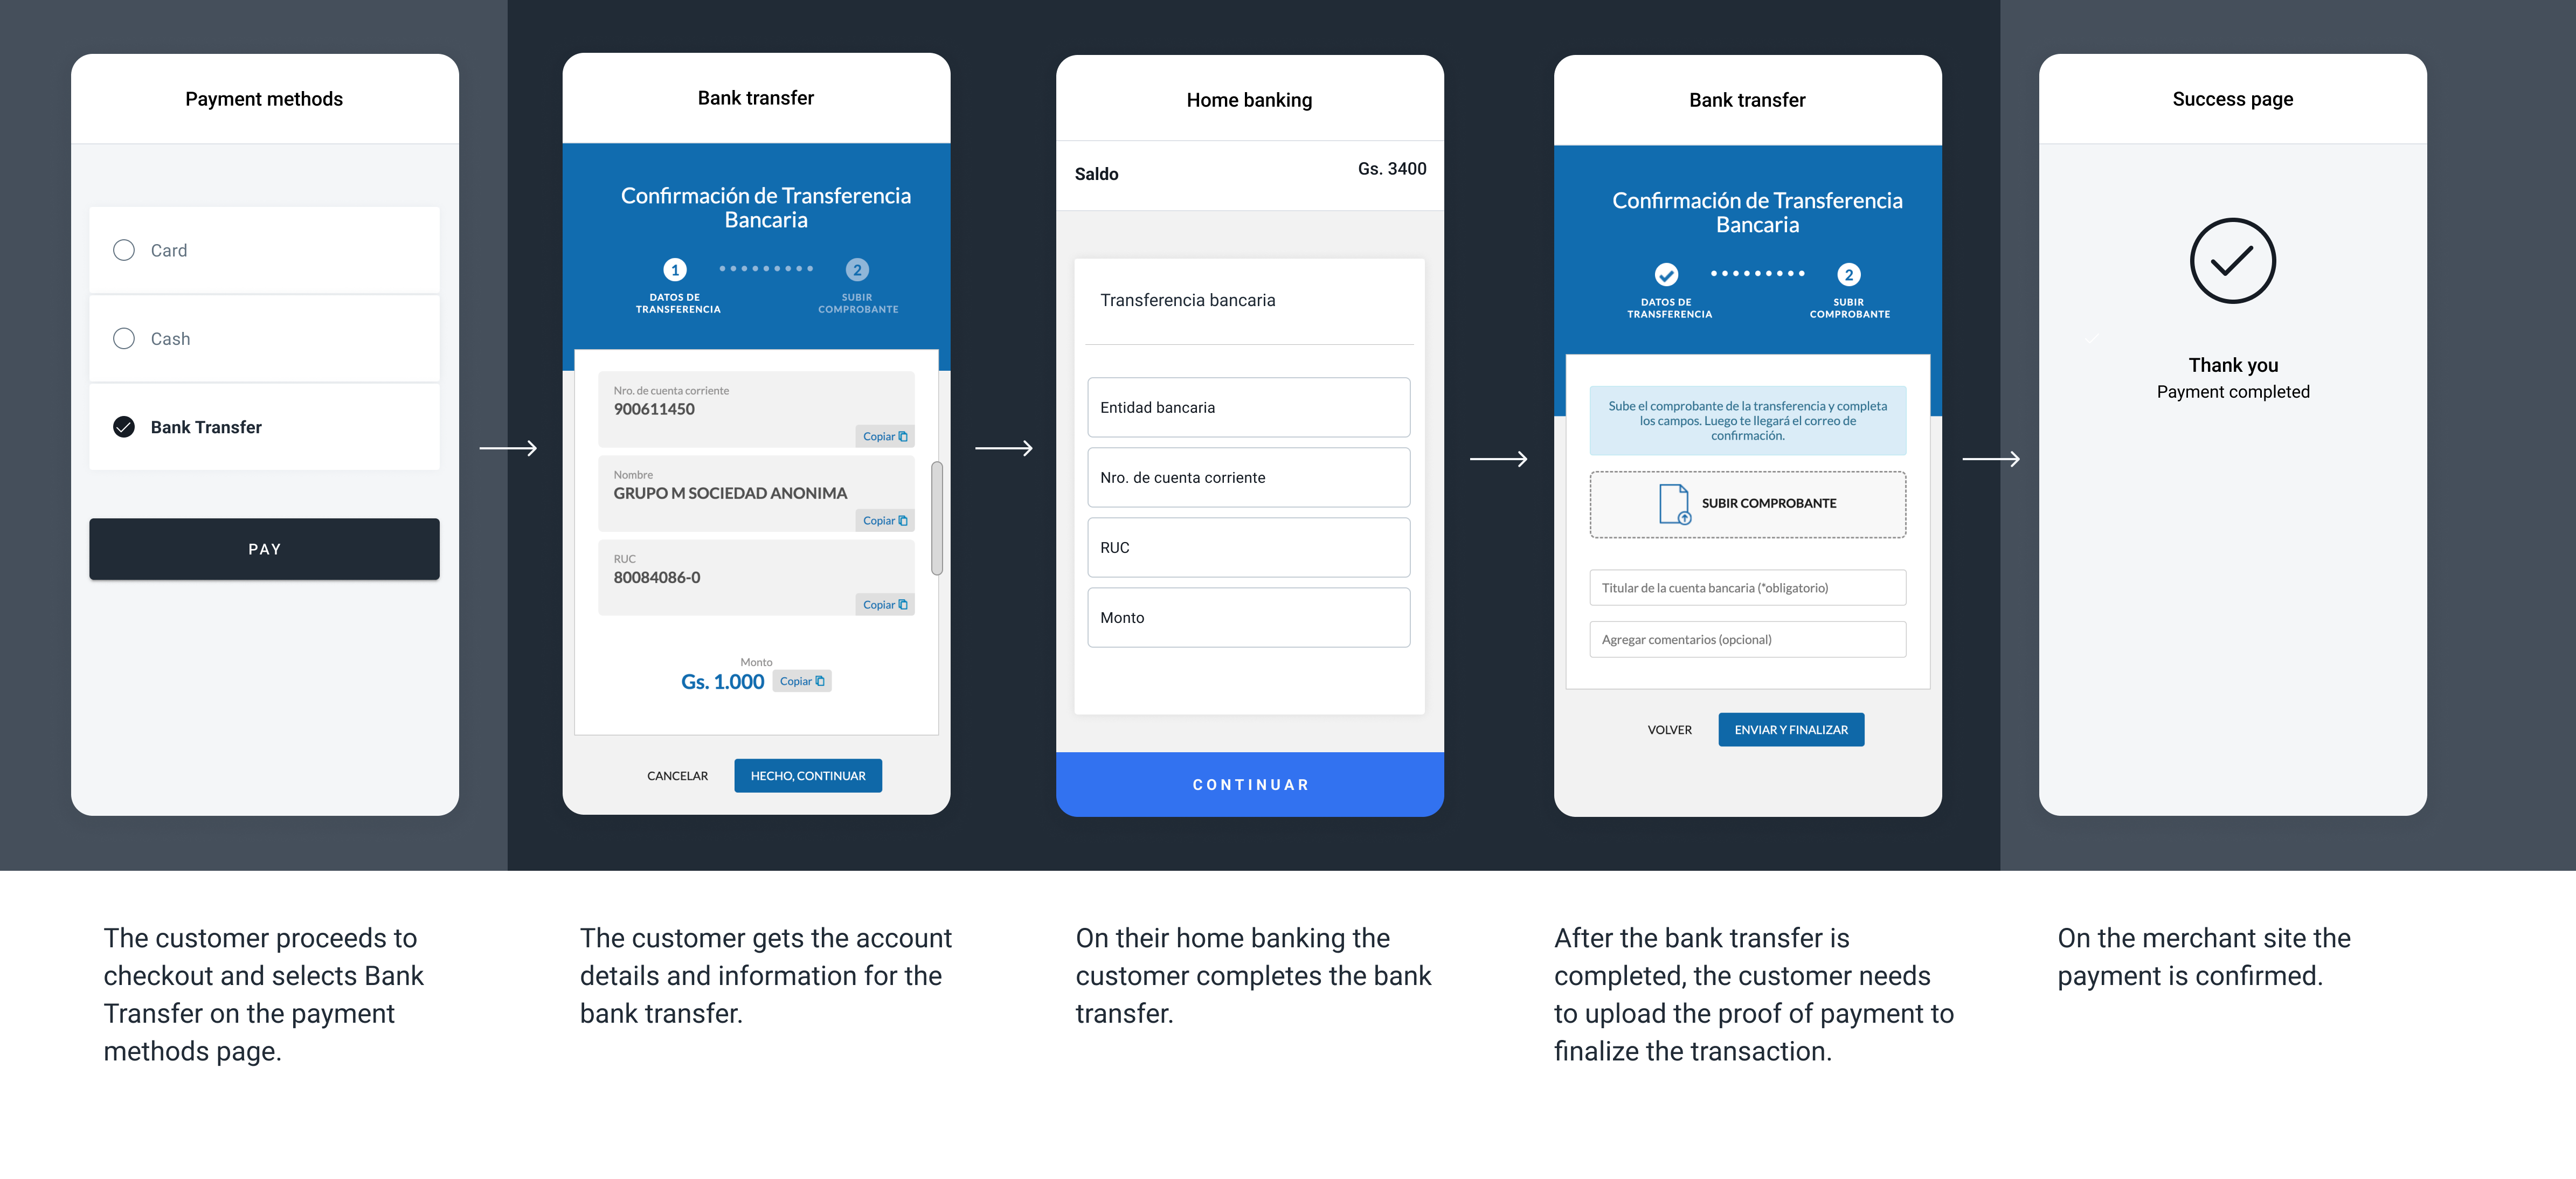 The screenshots illustrate a generic Bank Transfer payment flow.